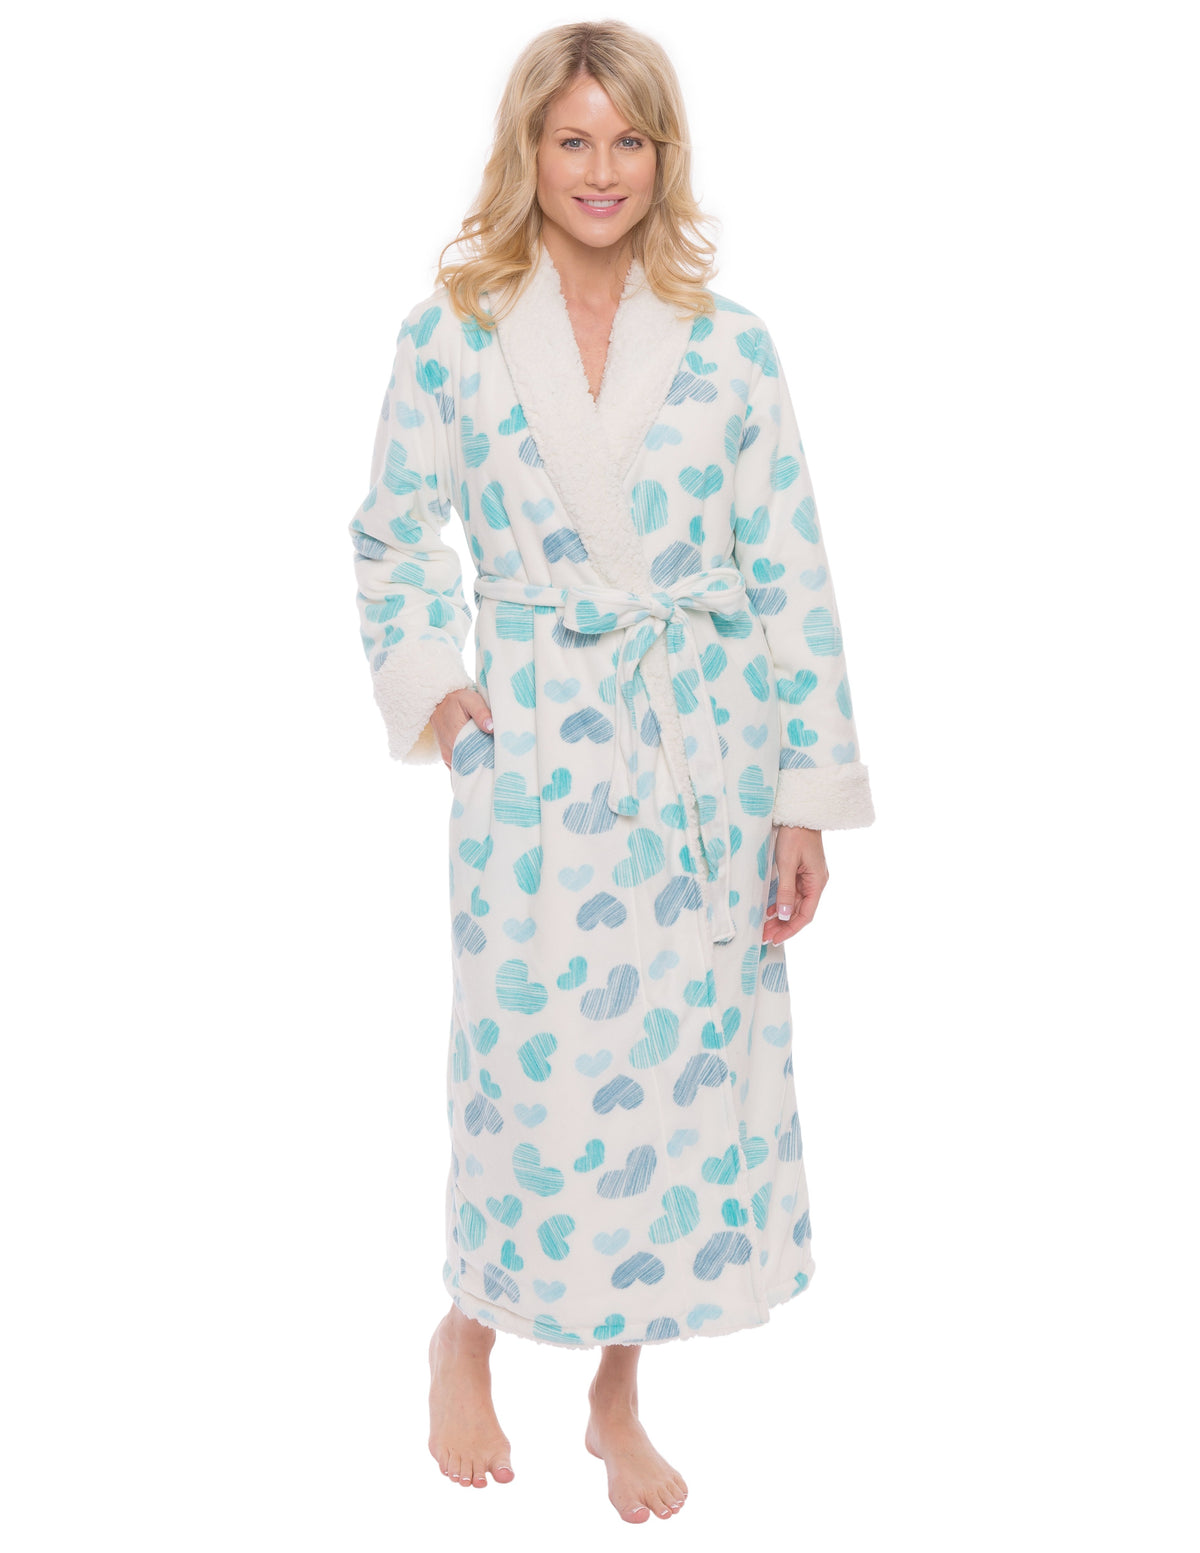 Womens Premium Microfleece Shearling Lined Robe - Scribbled Hearts White/Blue